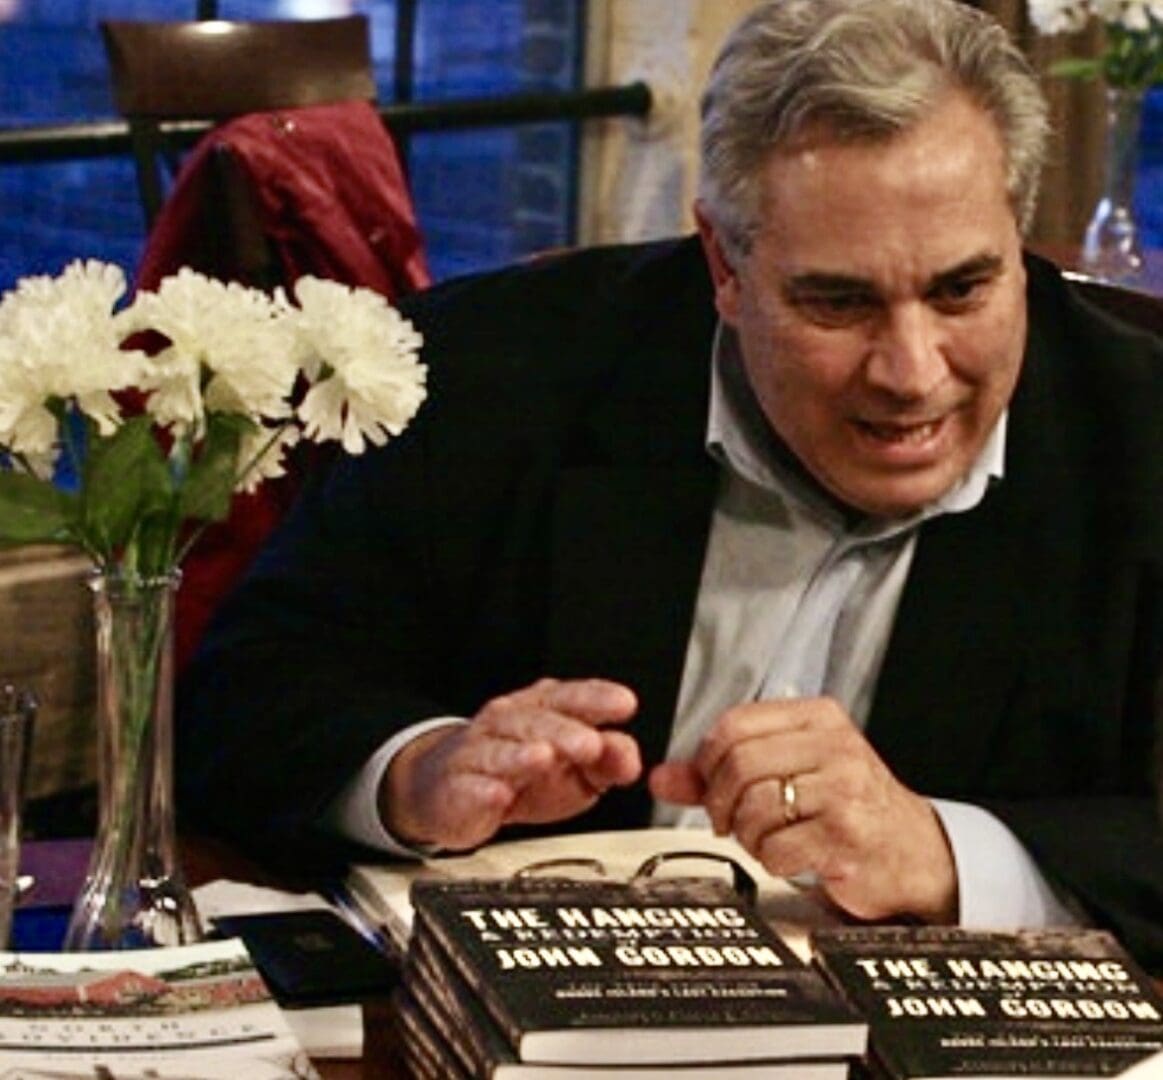 A man sitting at a table signing books.